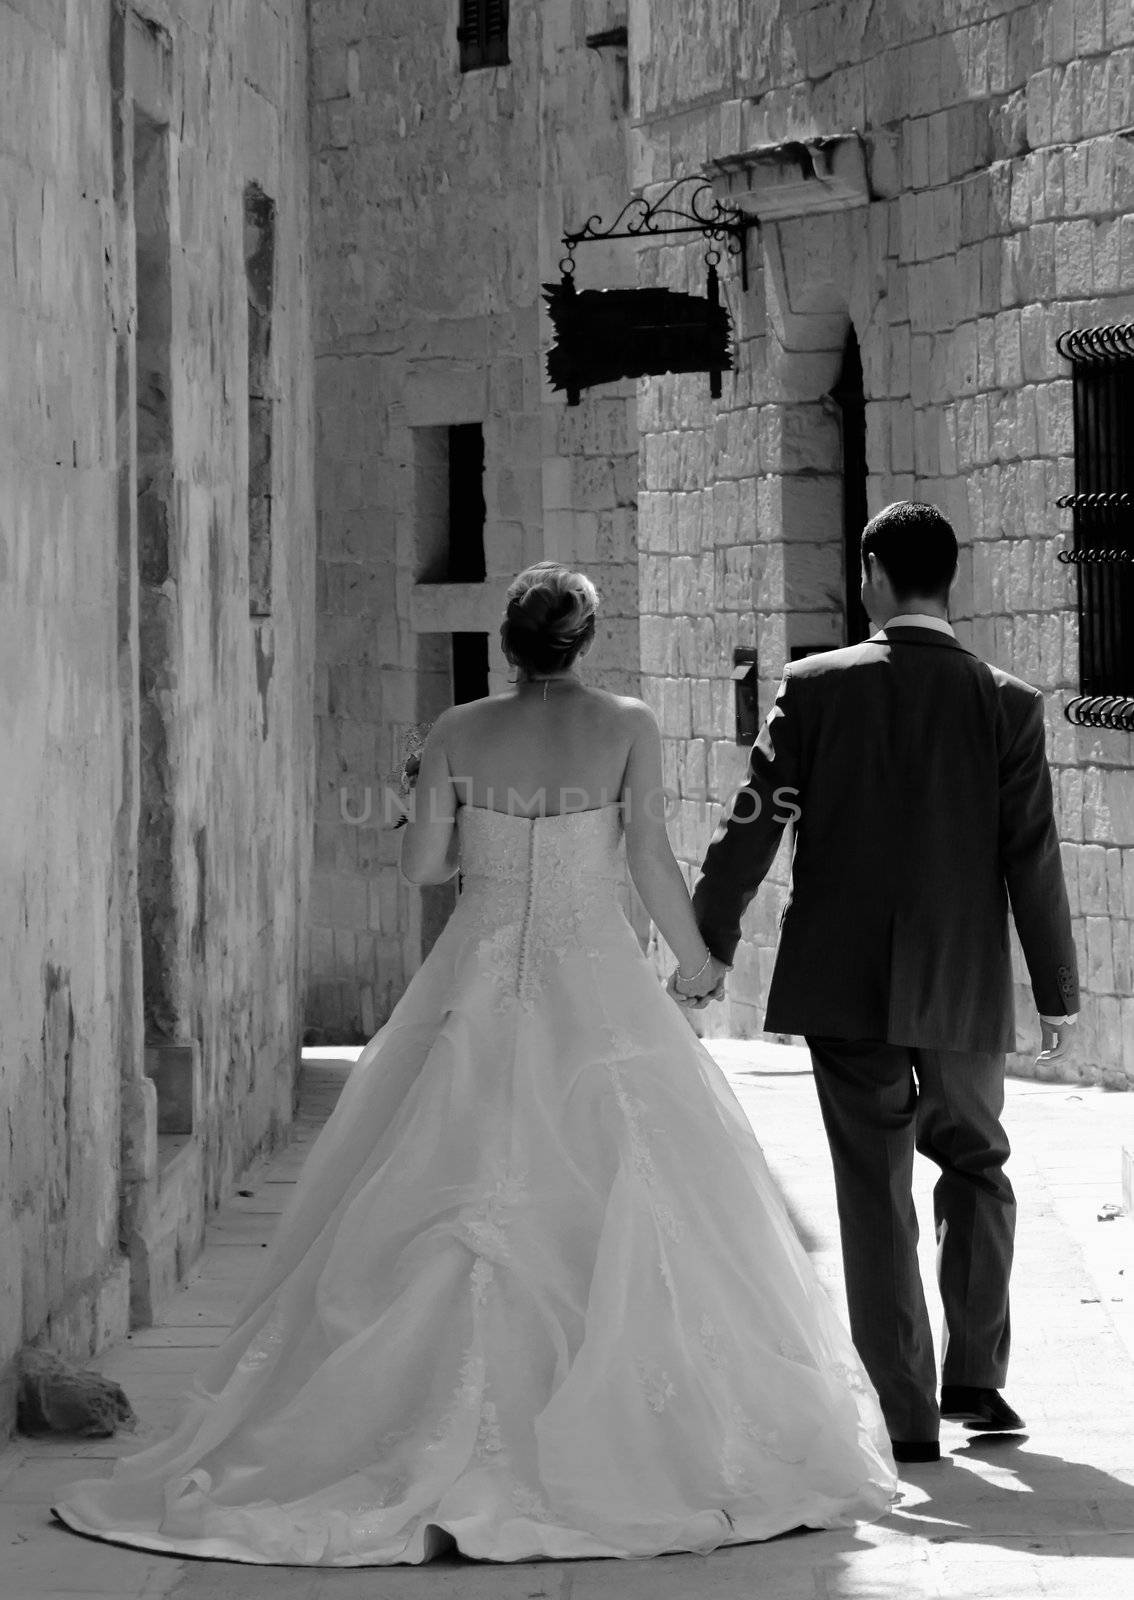 Newly wed couple walking in the old city streets in Malta